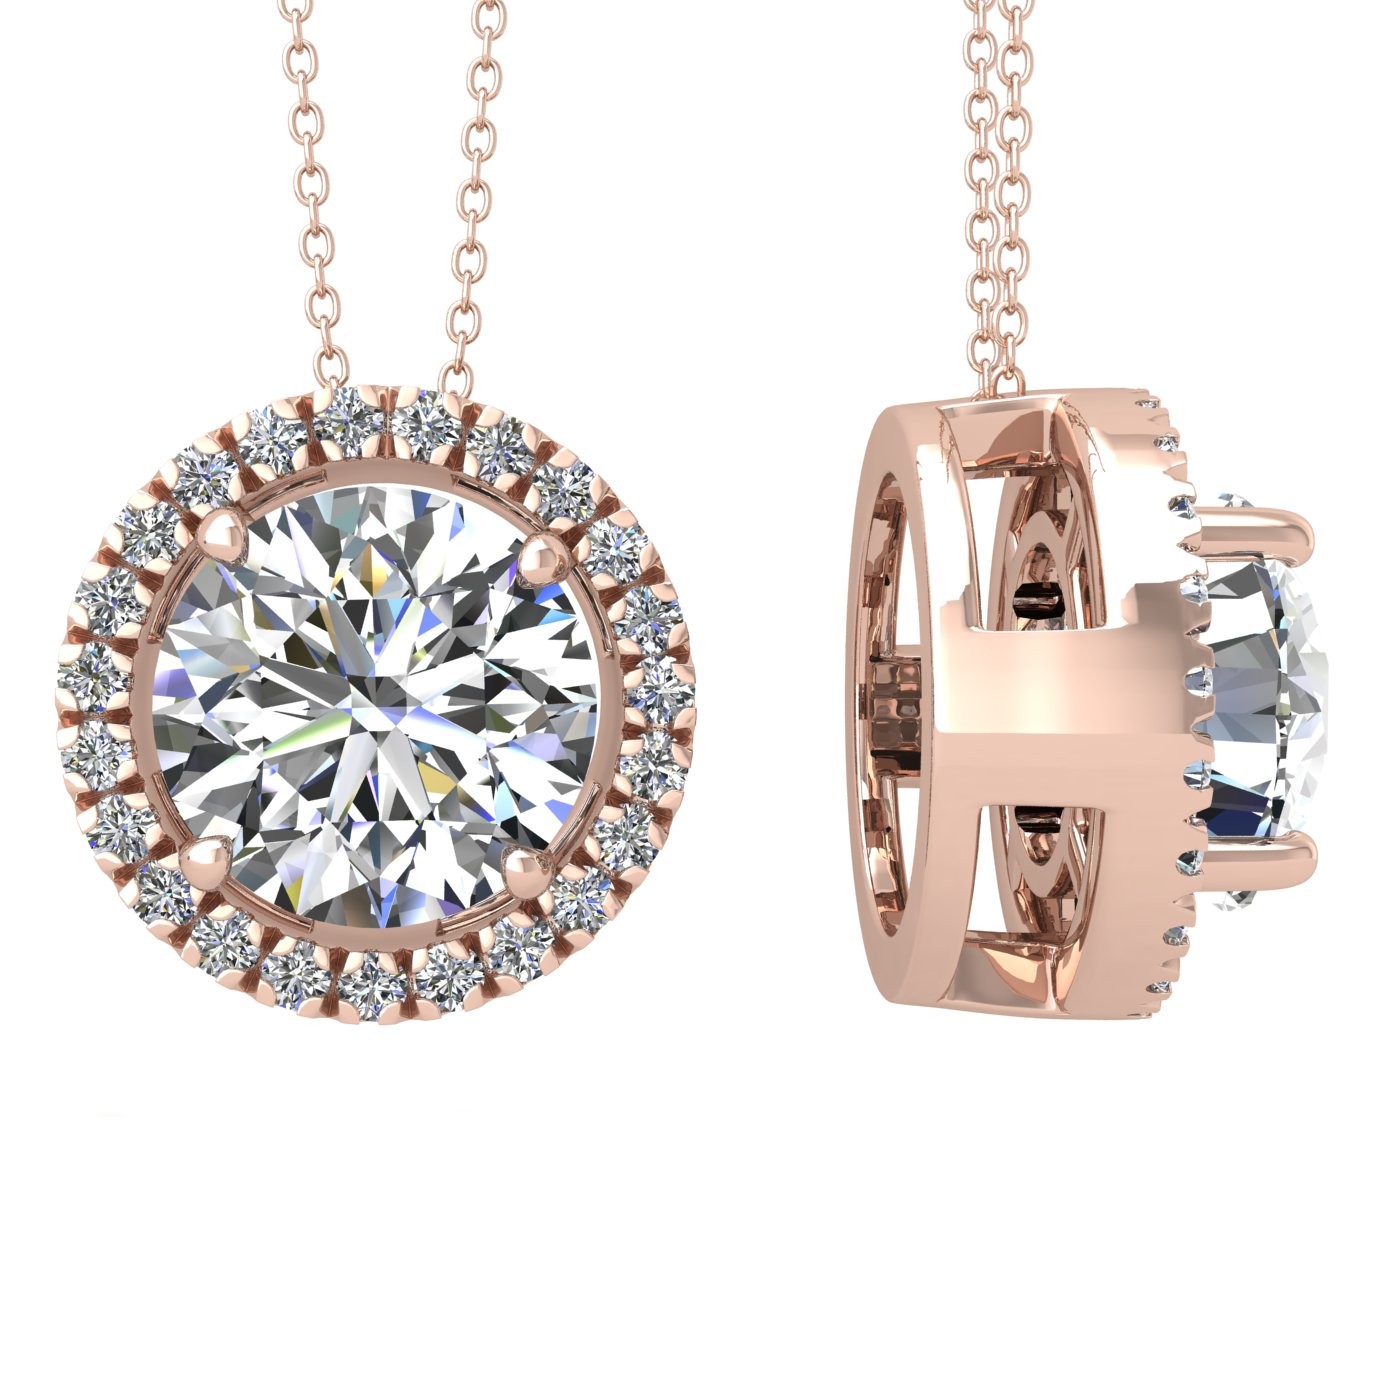 18k rose gold  2.5 ct 4 prong round shape diamond pendant with diamond pavÉ set halo including chain seperate from the pendant